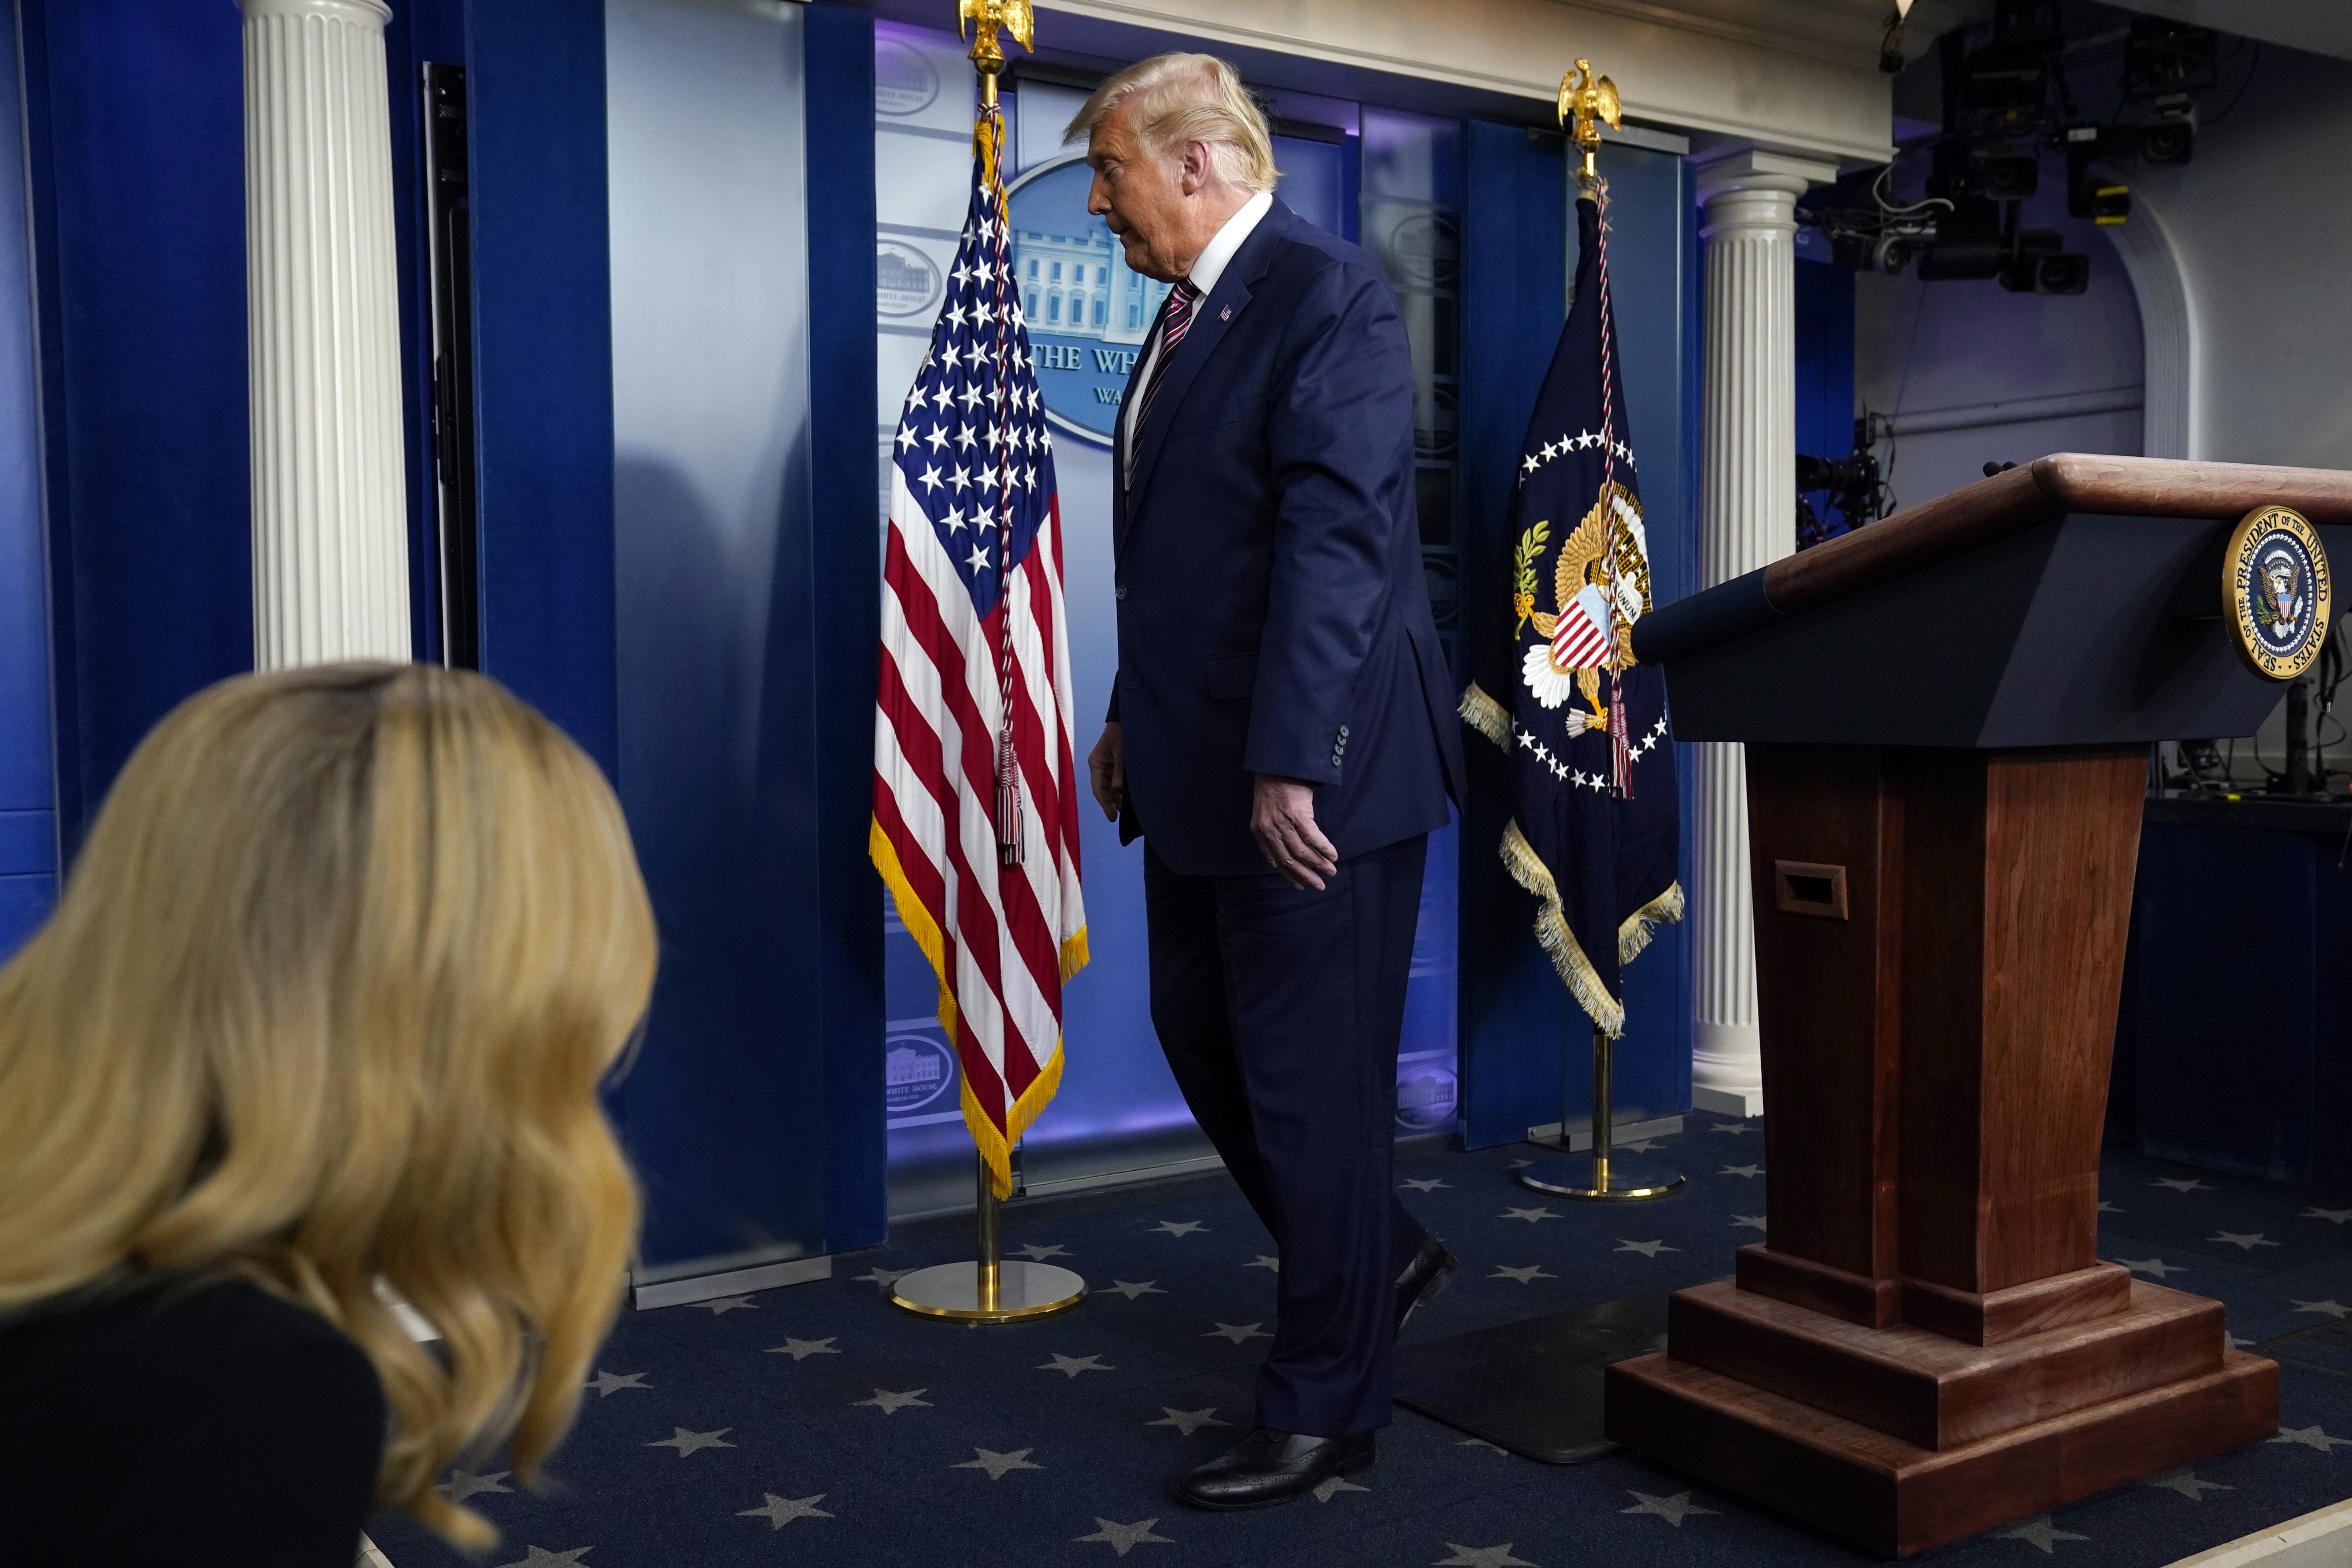 President Donald Trump left withing taking any questions after speaking at the White House.